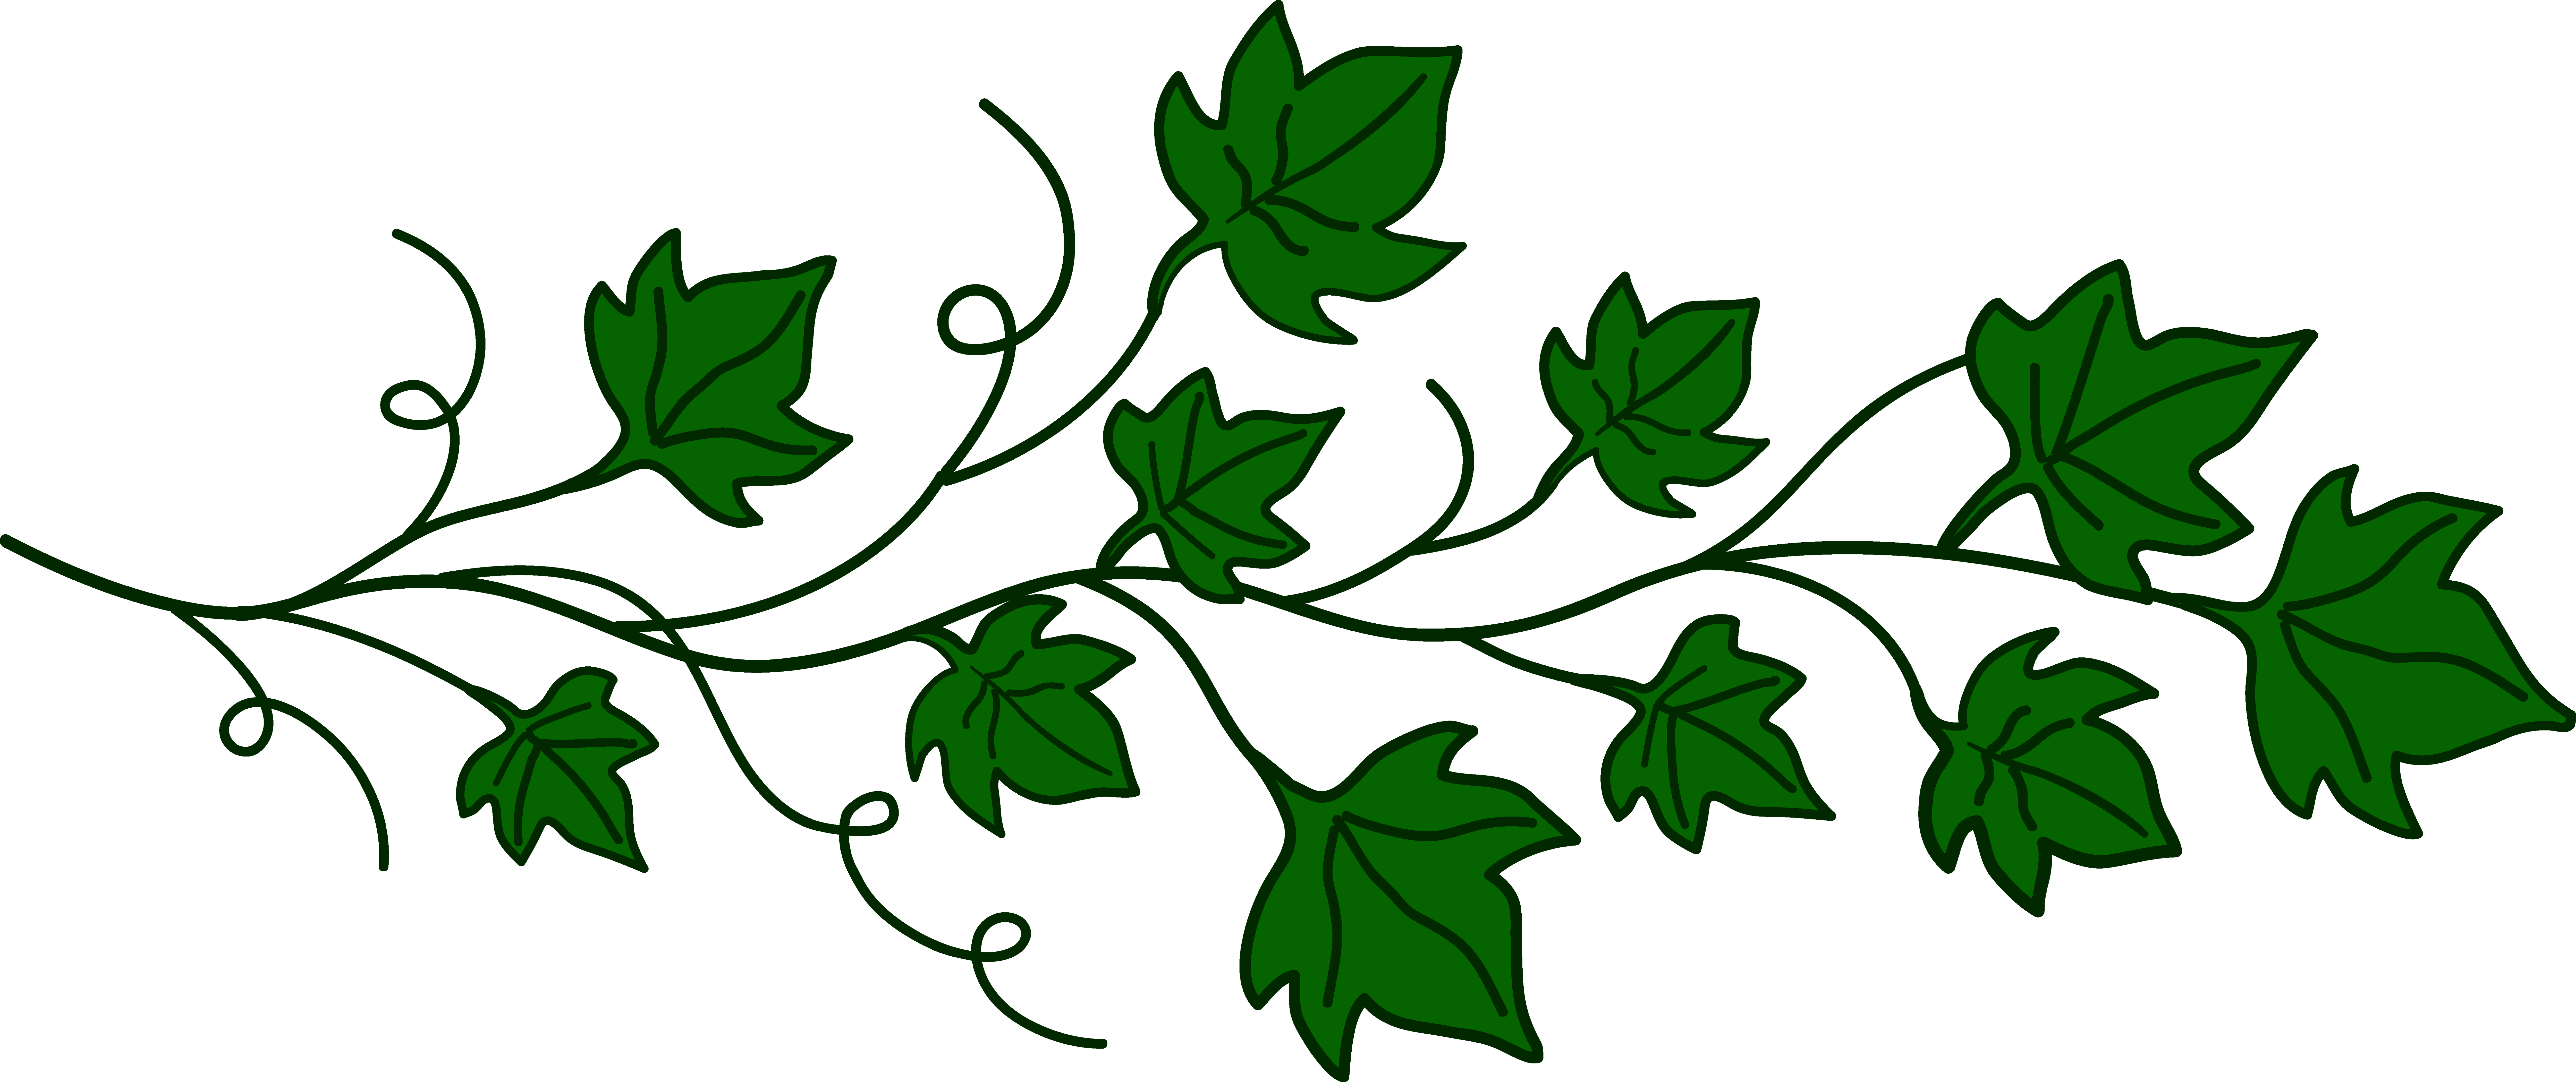 Free Grape Leaf Cliparts, Download Free Grape Leaf Cliparts png images